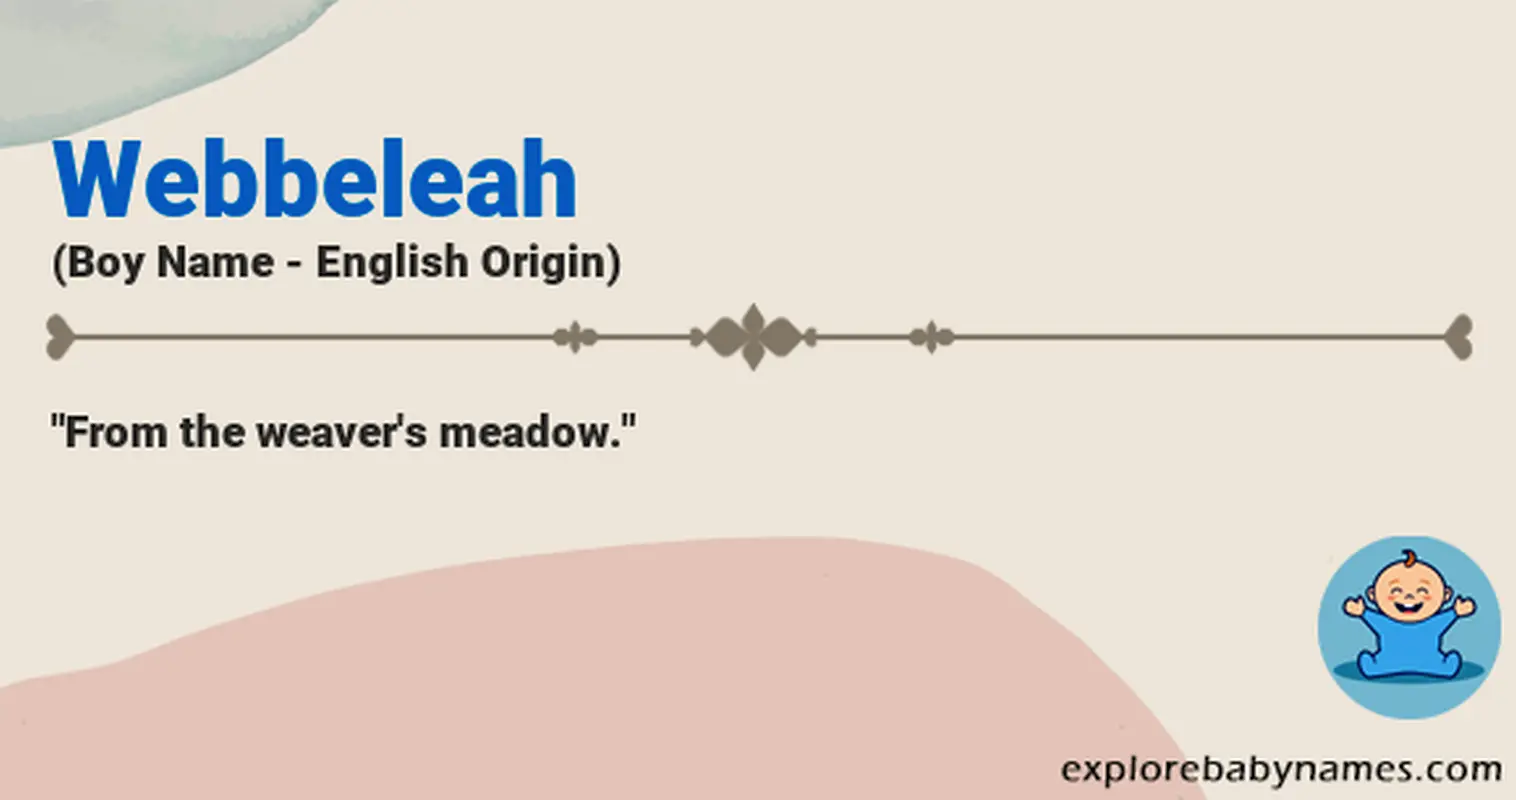 Meaning of Webbeleah